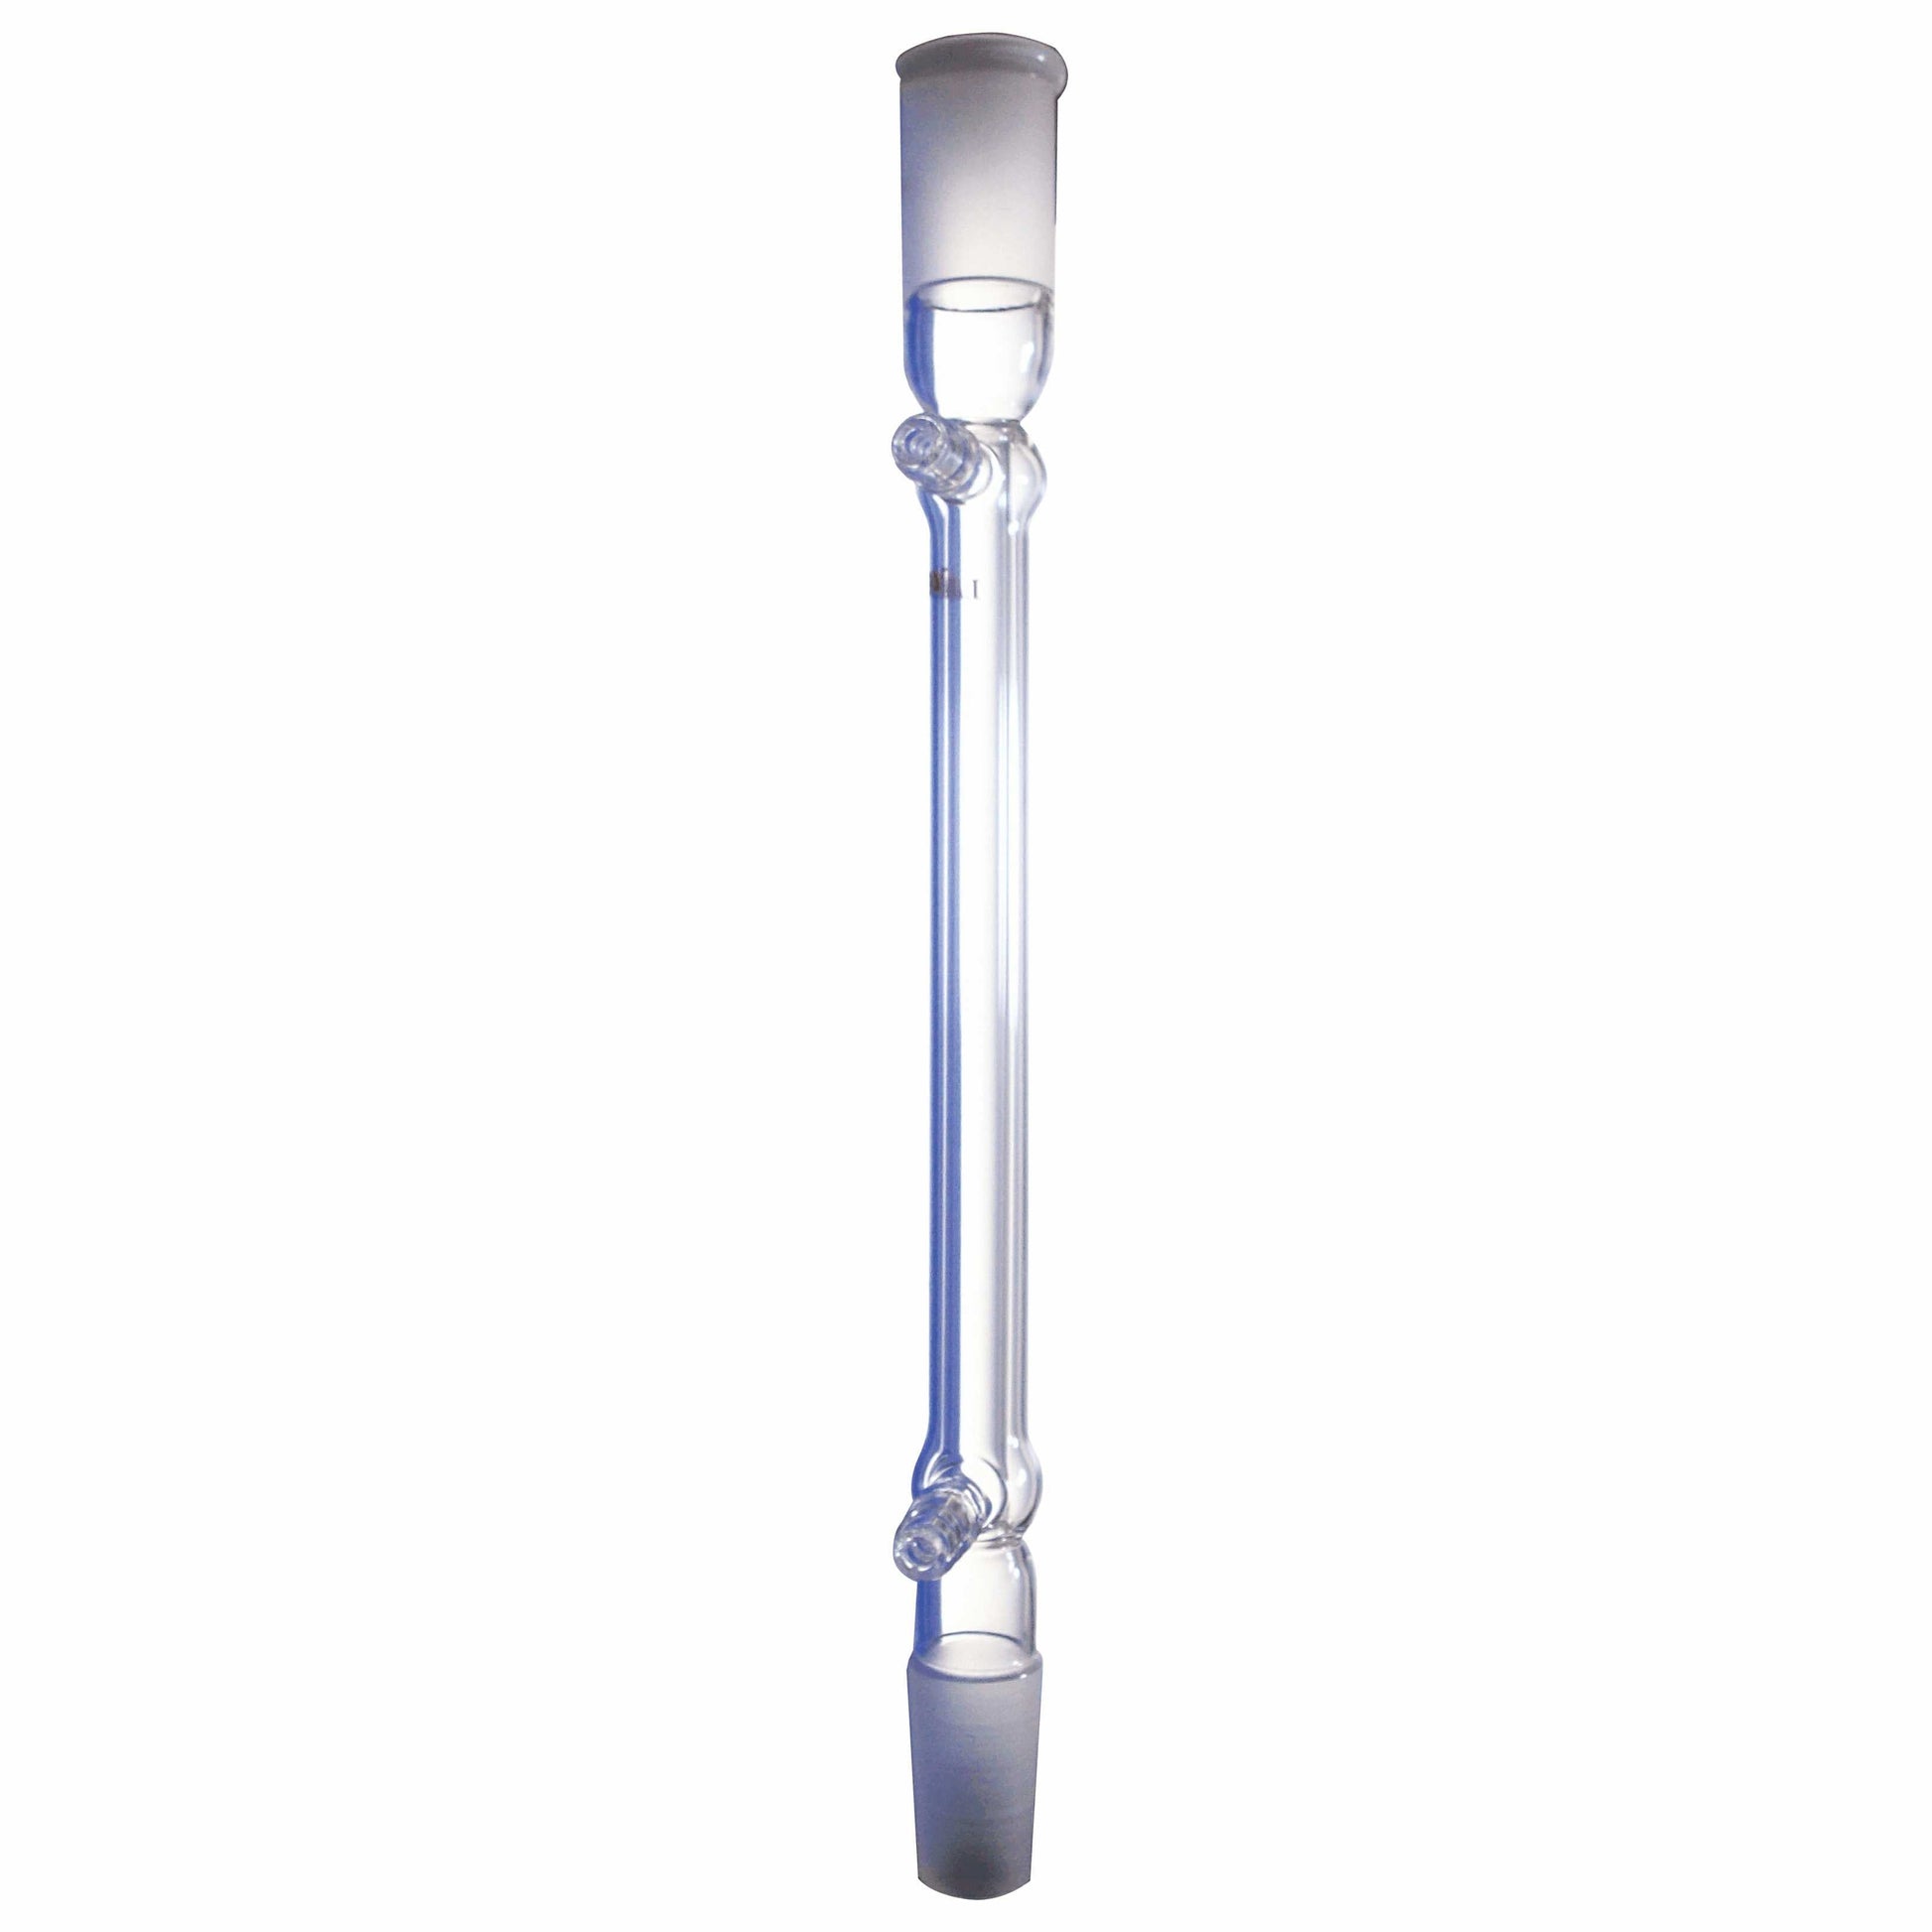 Glass West Condenser With Standard Taper Joint and Hose Connections - Scienmart